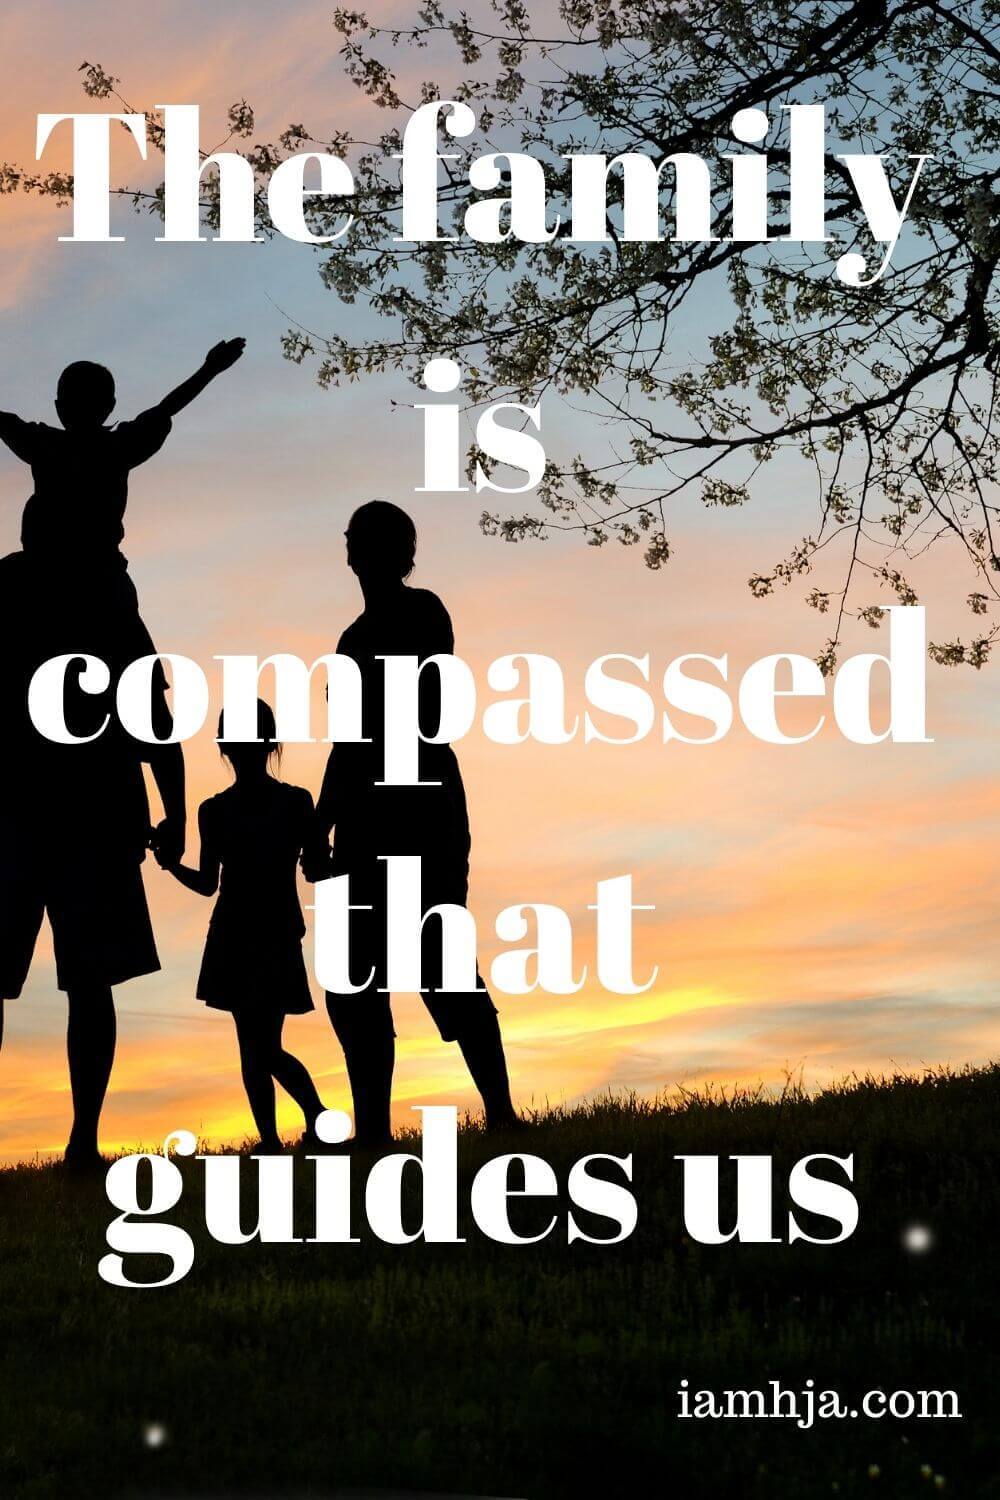 The family is compassed that guides us